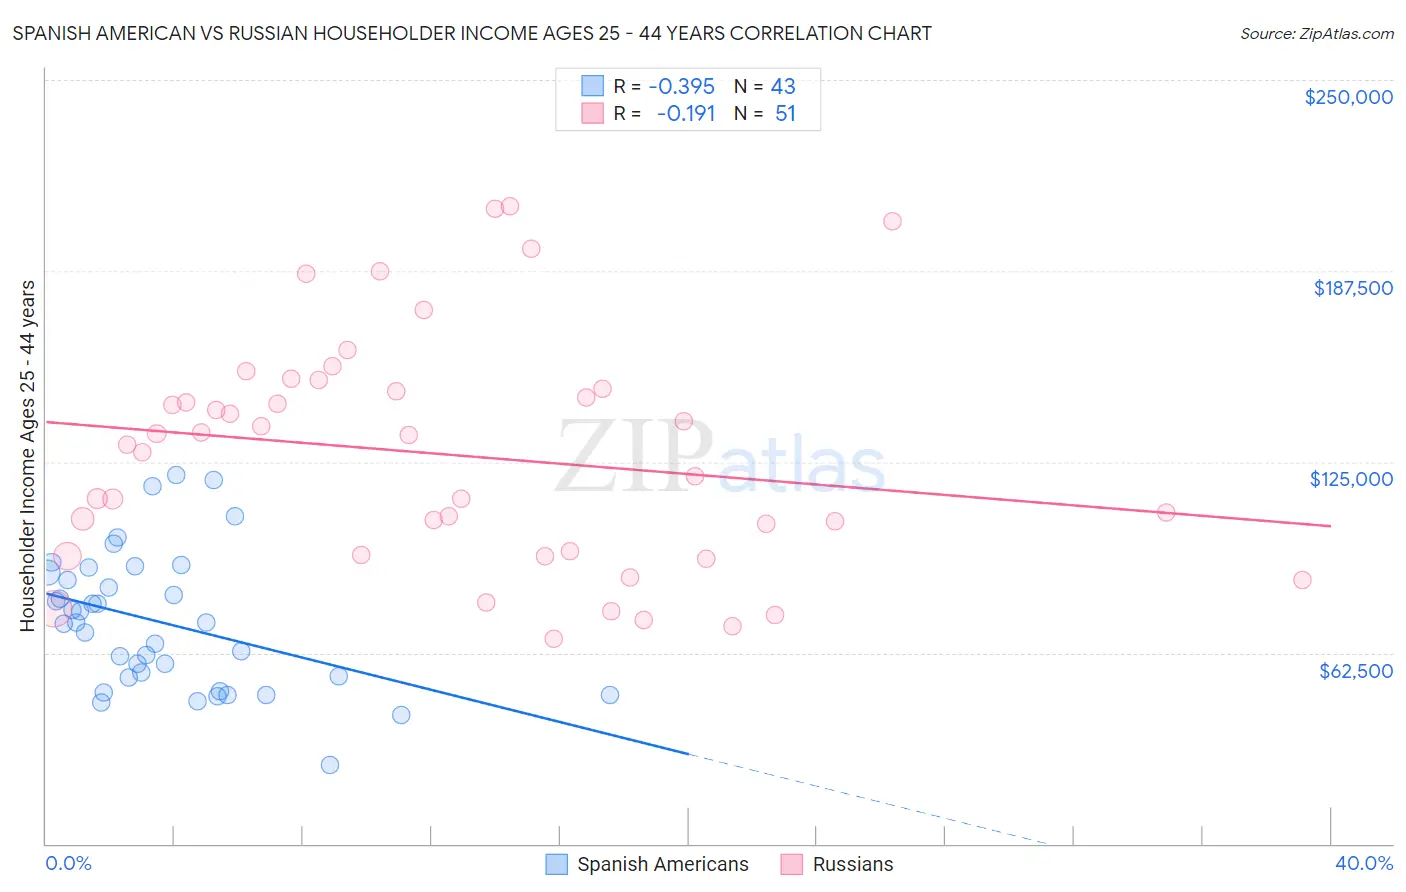 Spanish American vs Russian Householder Income Ages 25 - 44 years